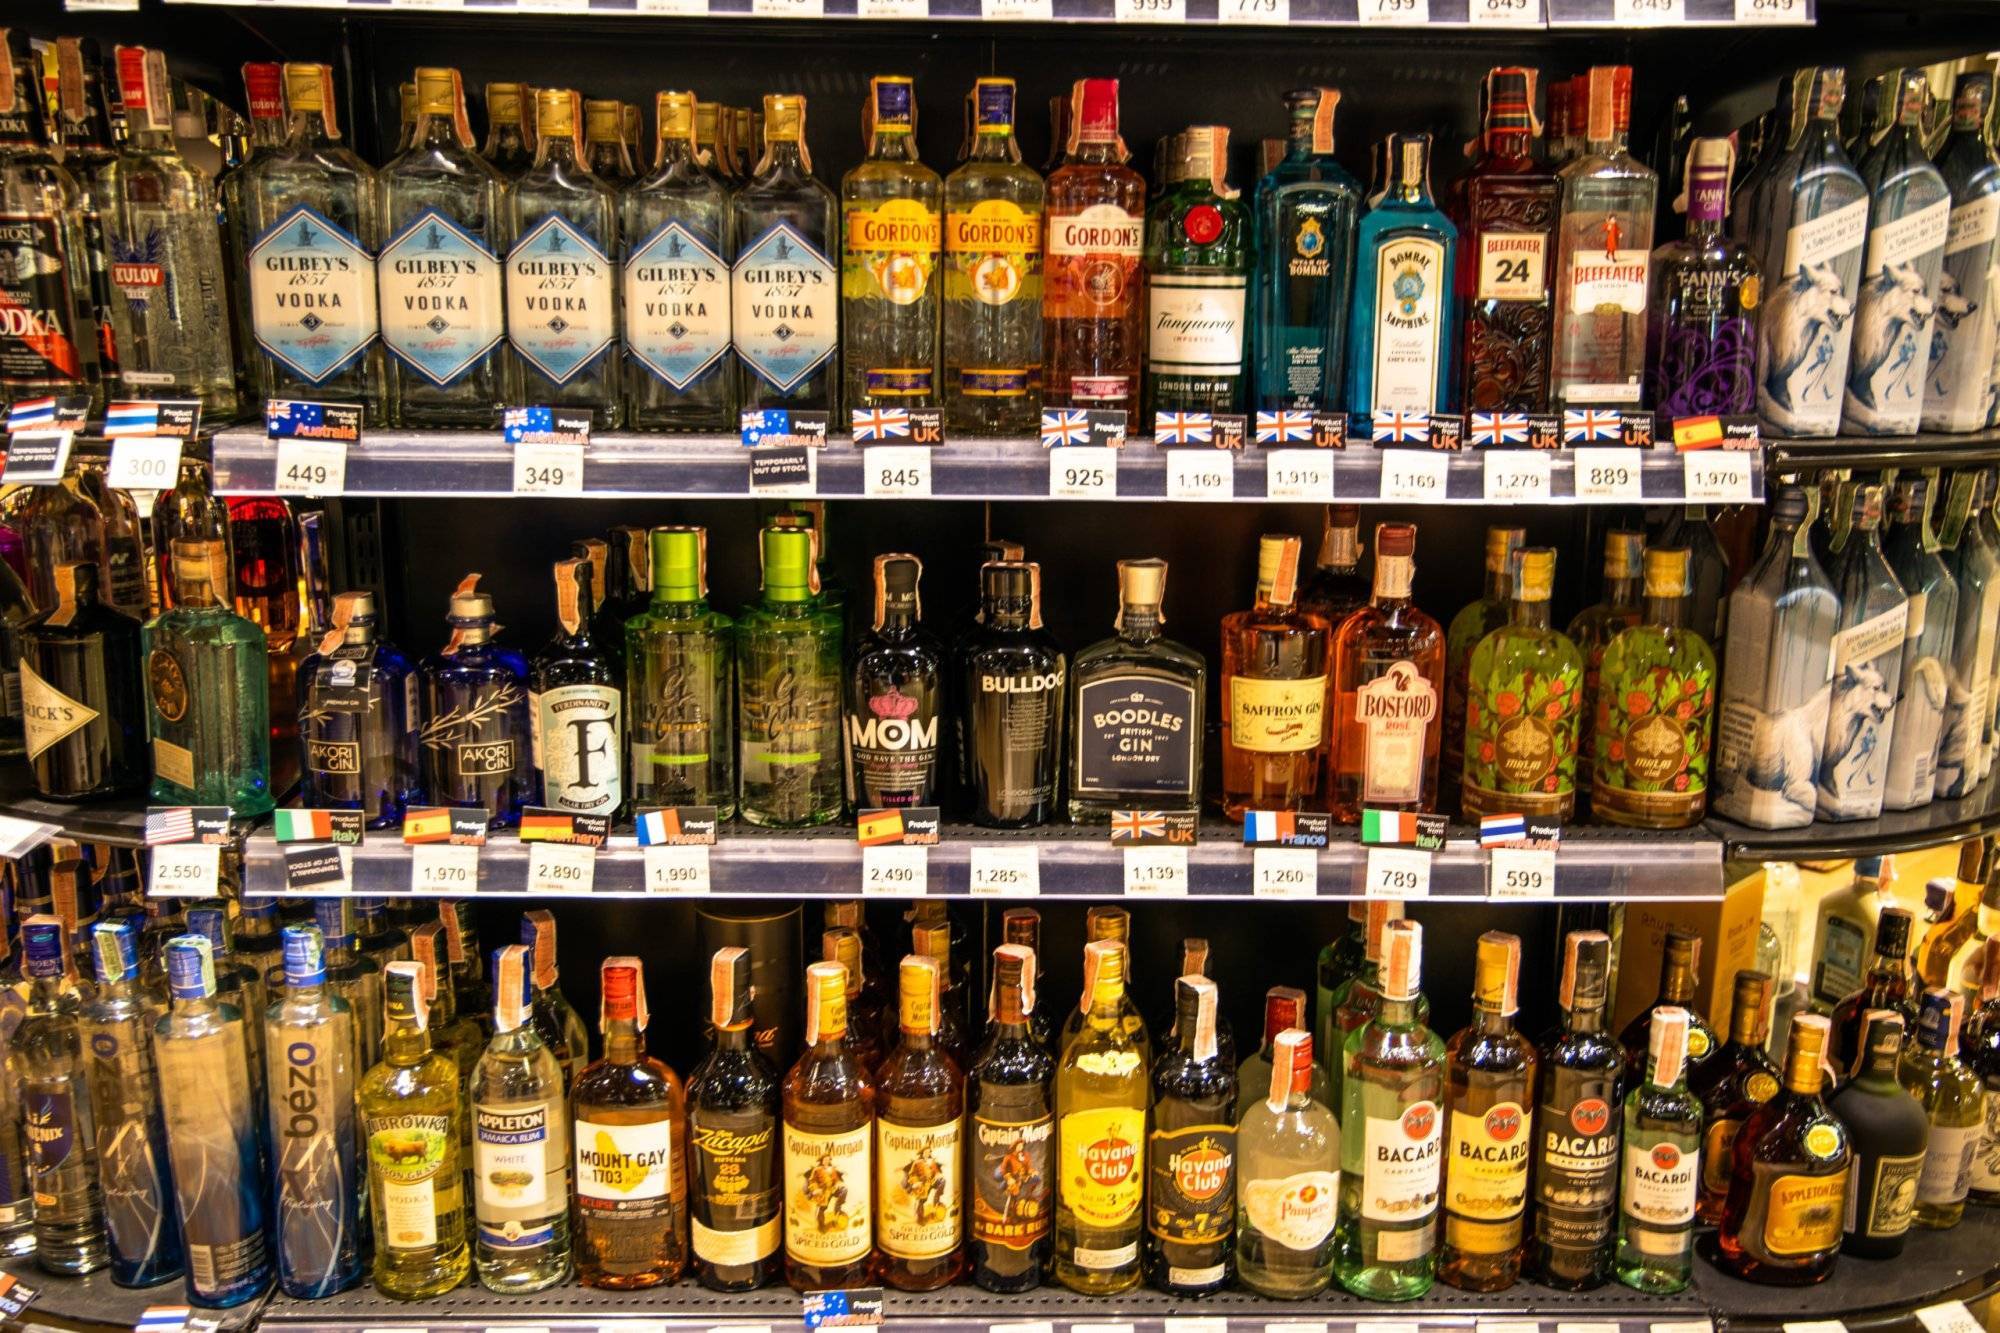 Assortment of liquor including gin, vodka, rum, whisky, etc. on the shelves with price tag in a supermarket.